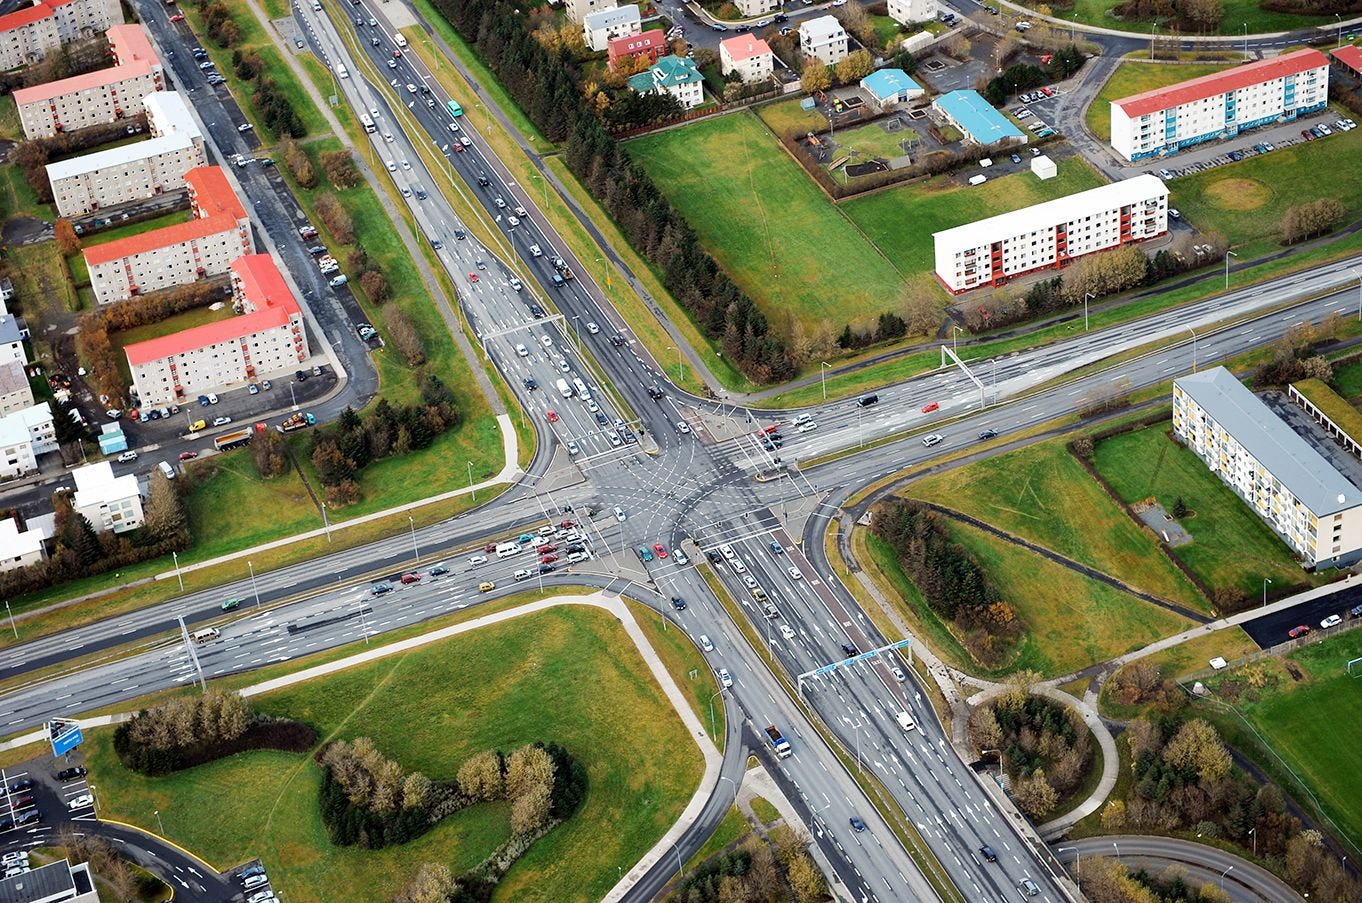 A complex intersection with multiple roadways, pedestrian paths and surrounding buildings